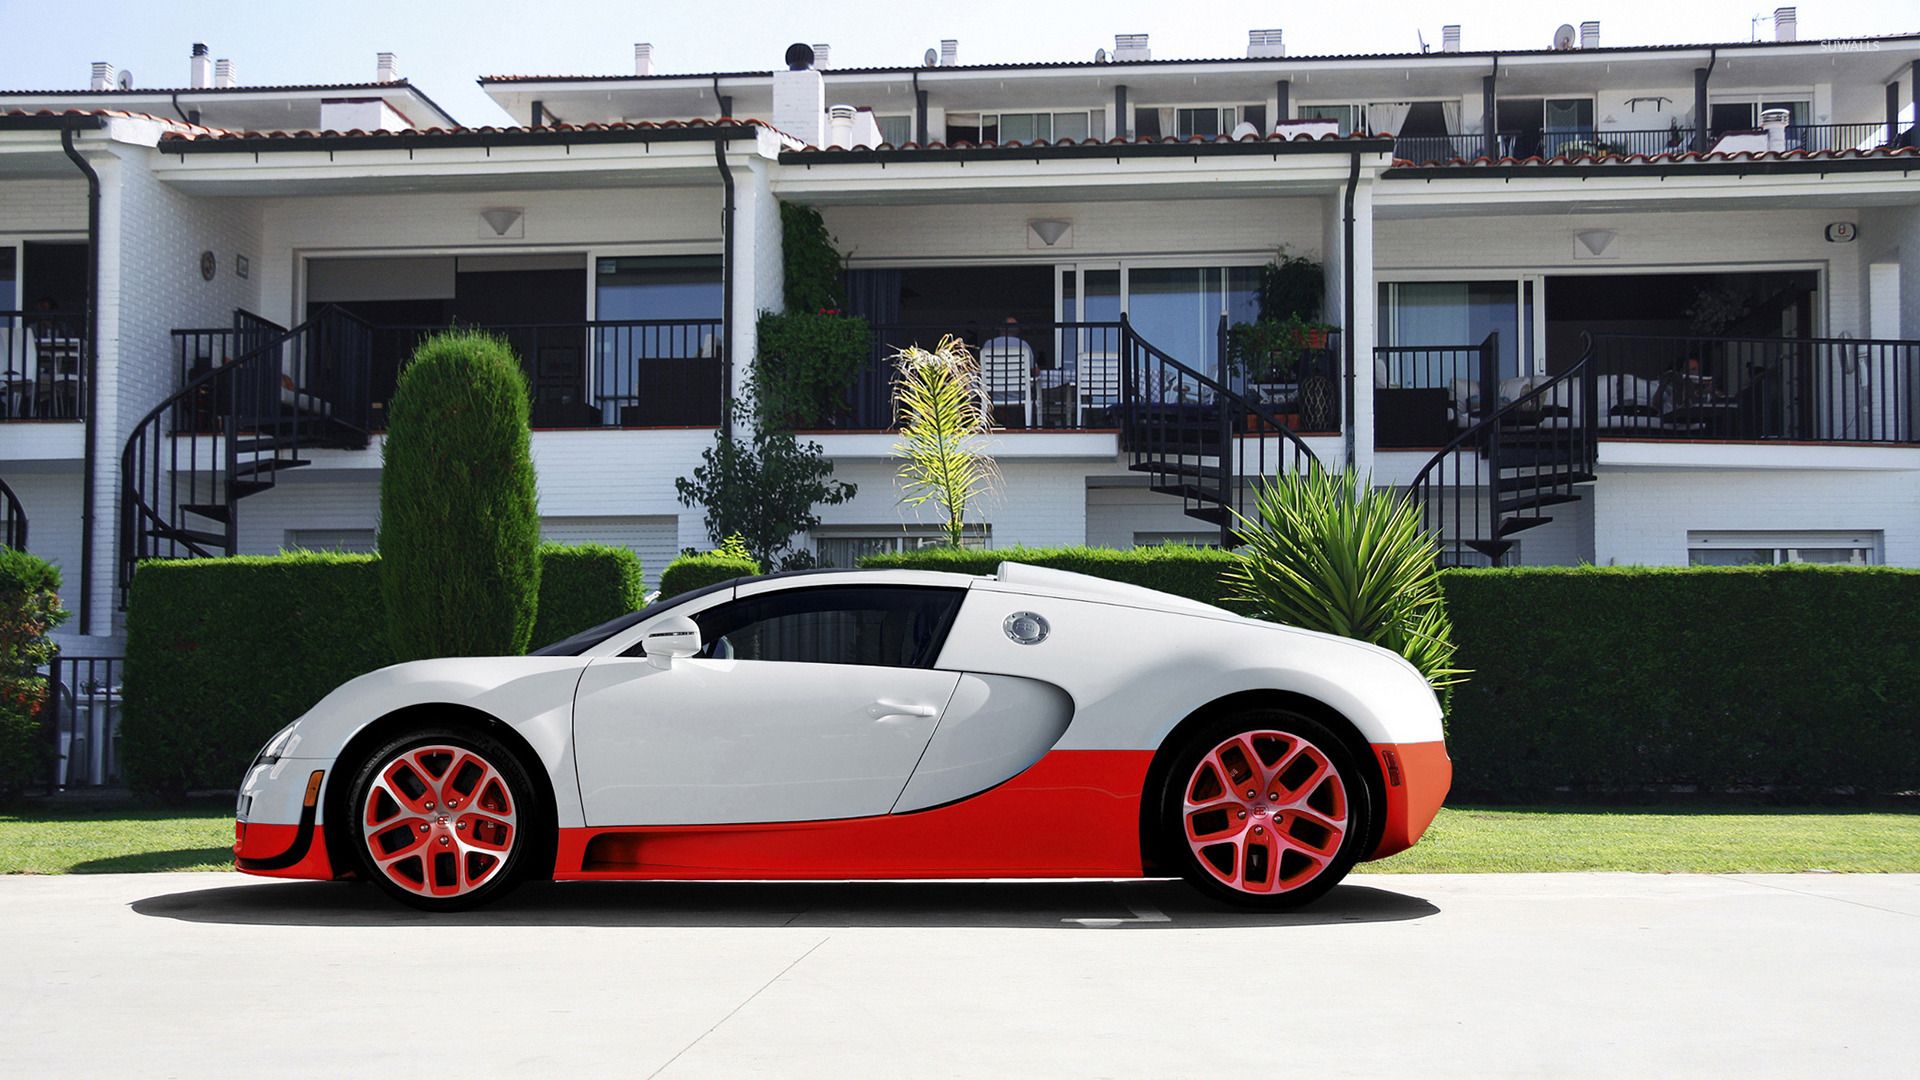 White Bugatti Veyron in front of the house wallpaper wallpaper